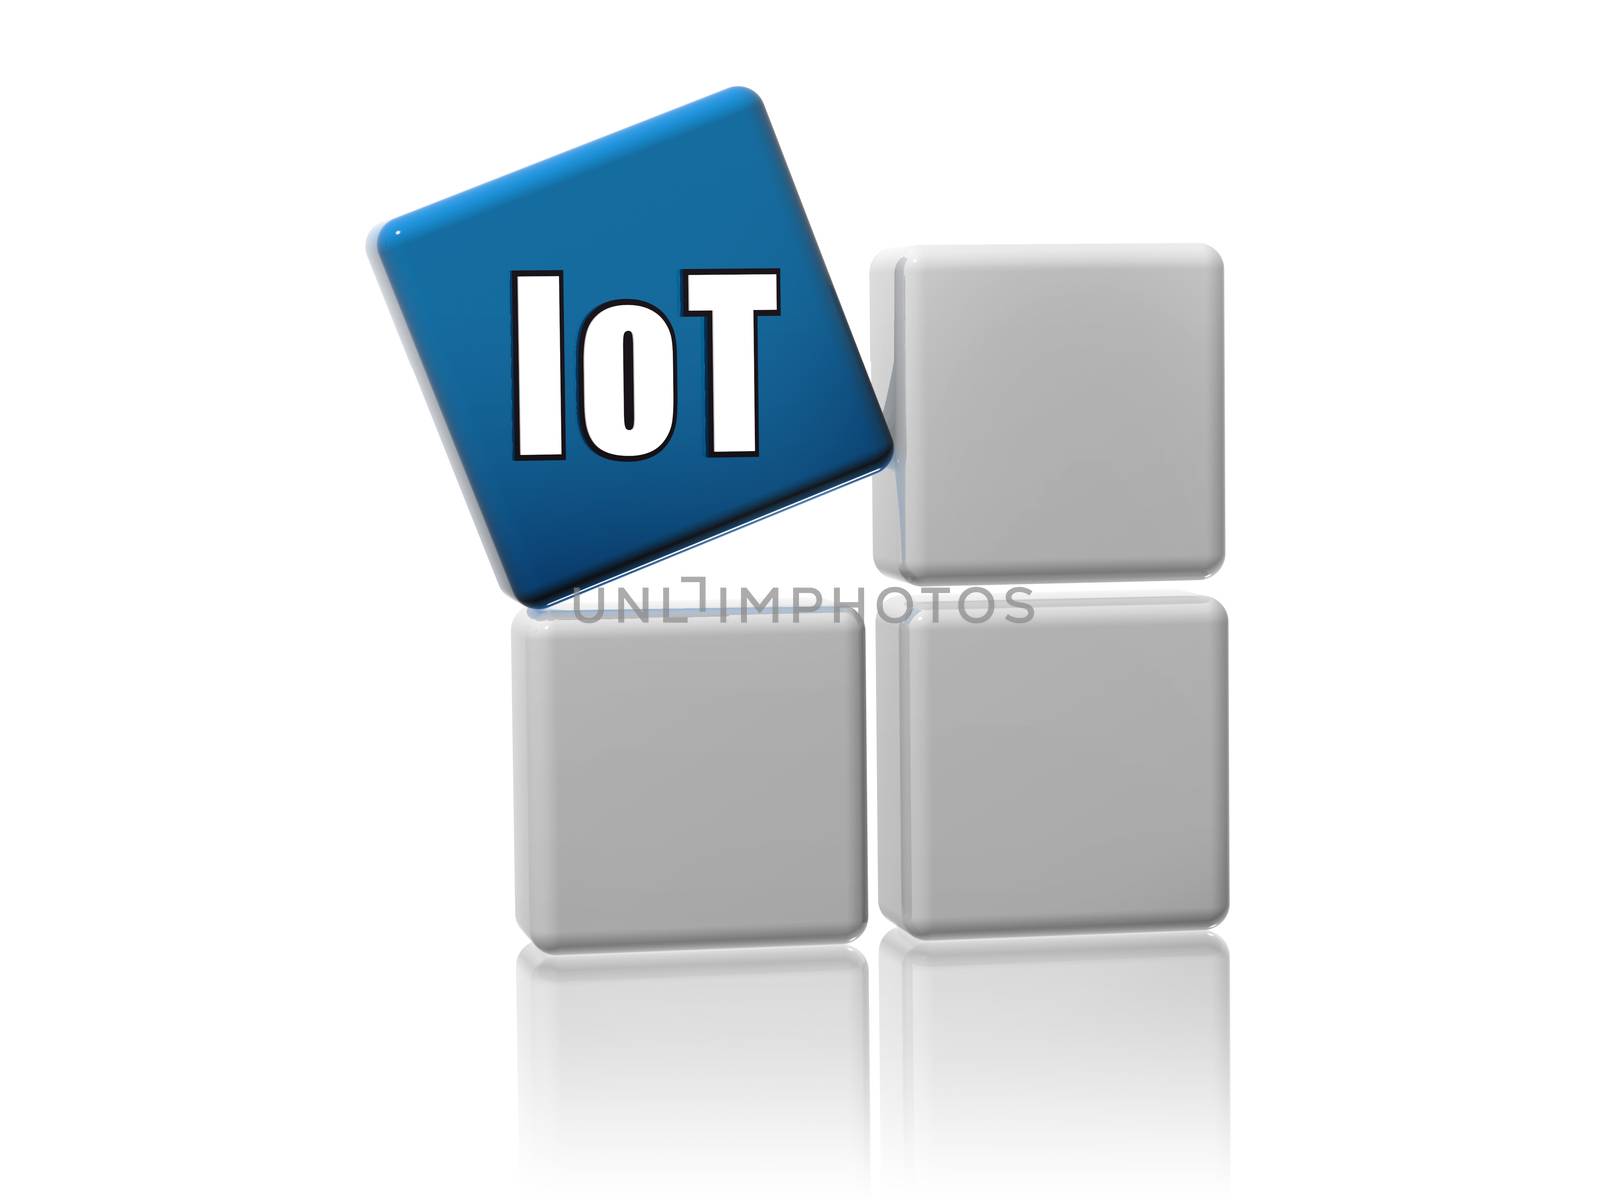 iot - internet of things in blue cube on boxes by marinini